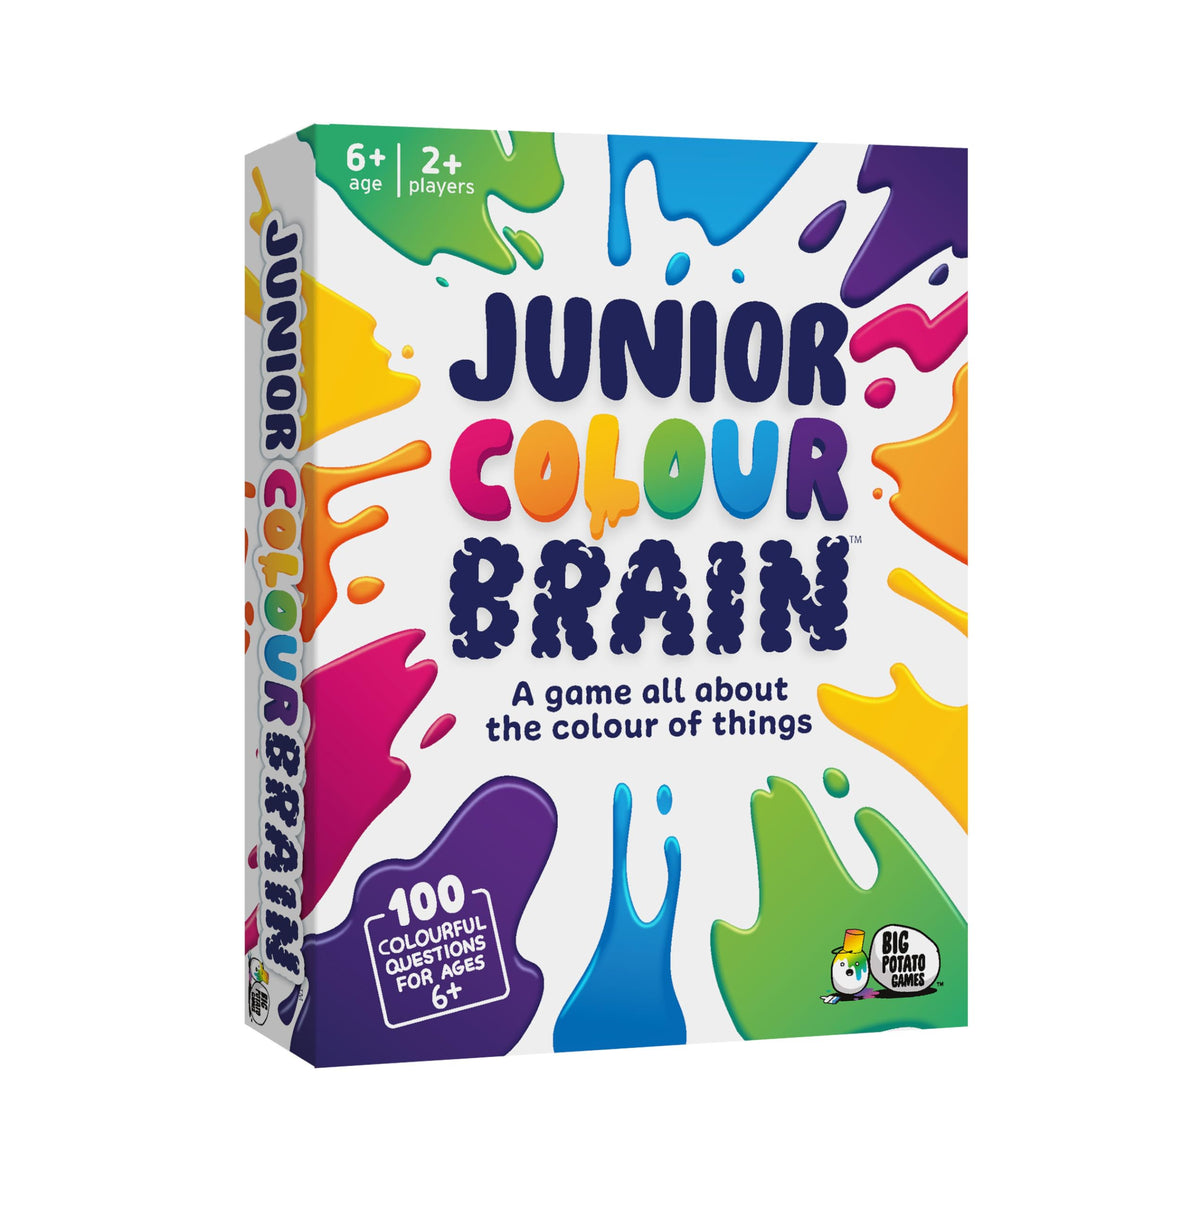 Junior Colourbrain Board Game: Ultimate Game for Families Fun for Kids and Adults Multicoloured, Fun Board Game for Families